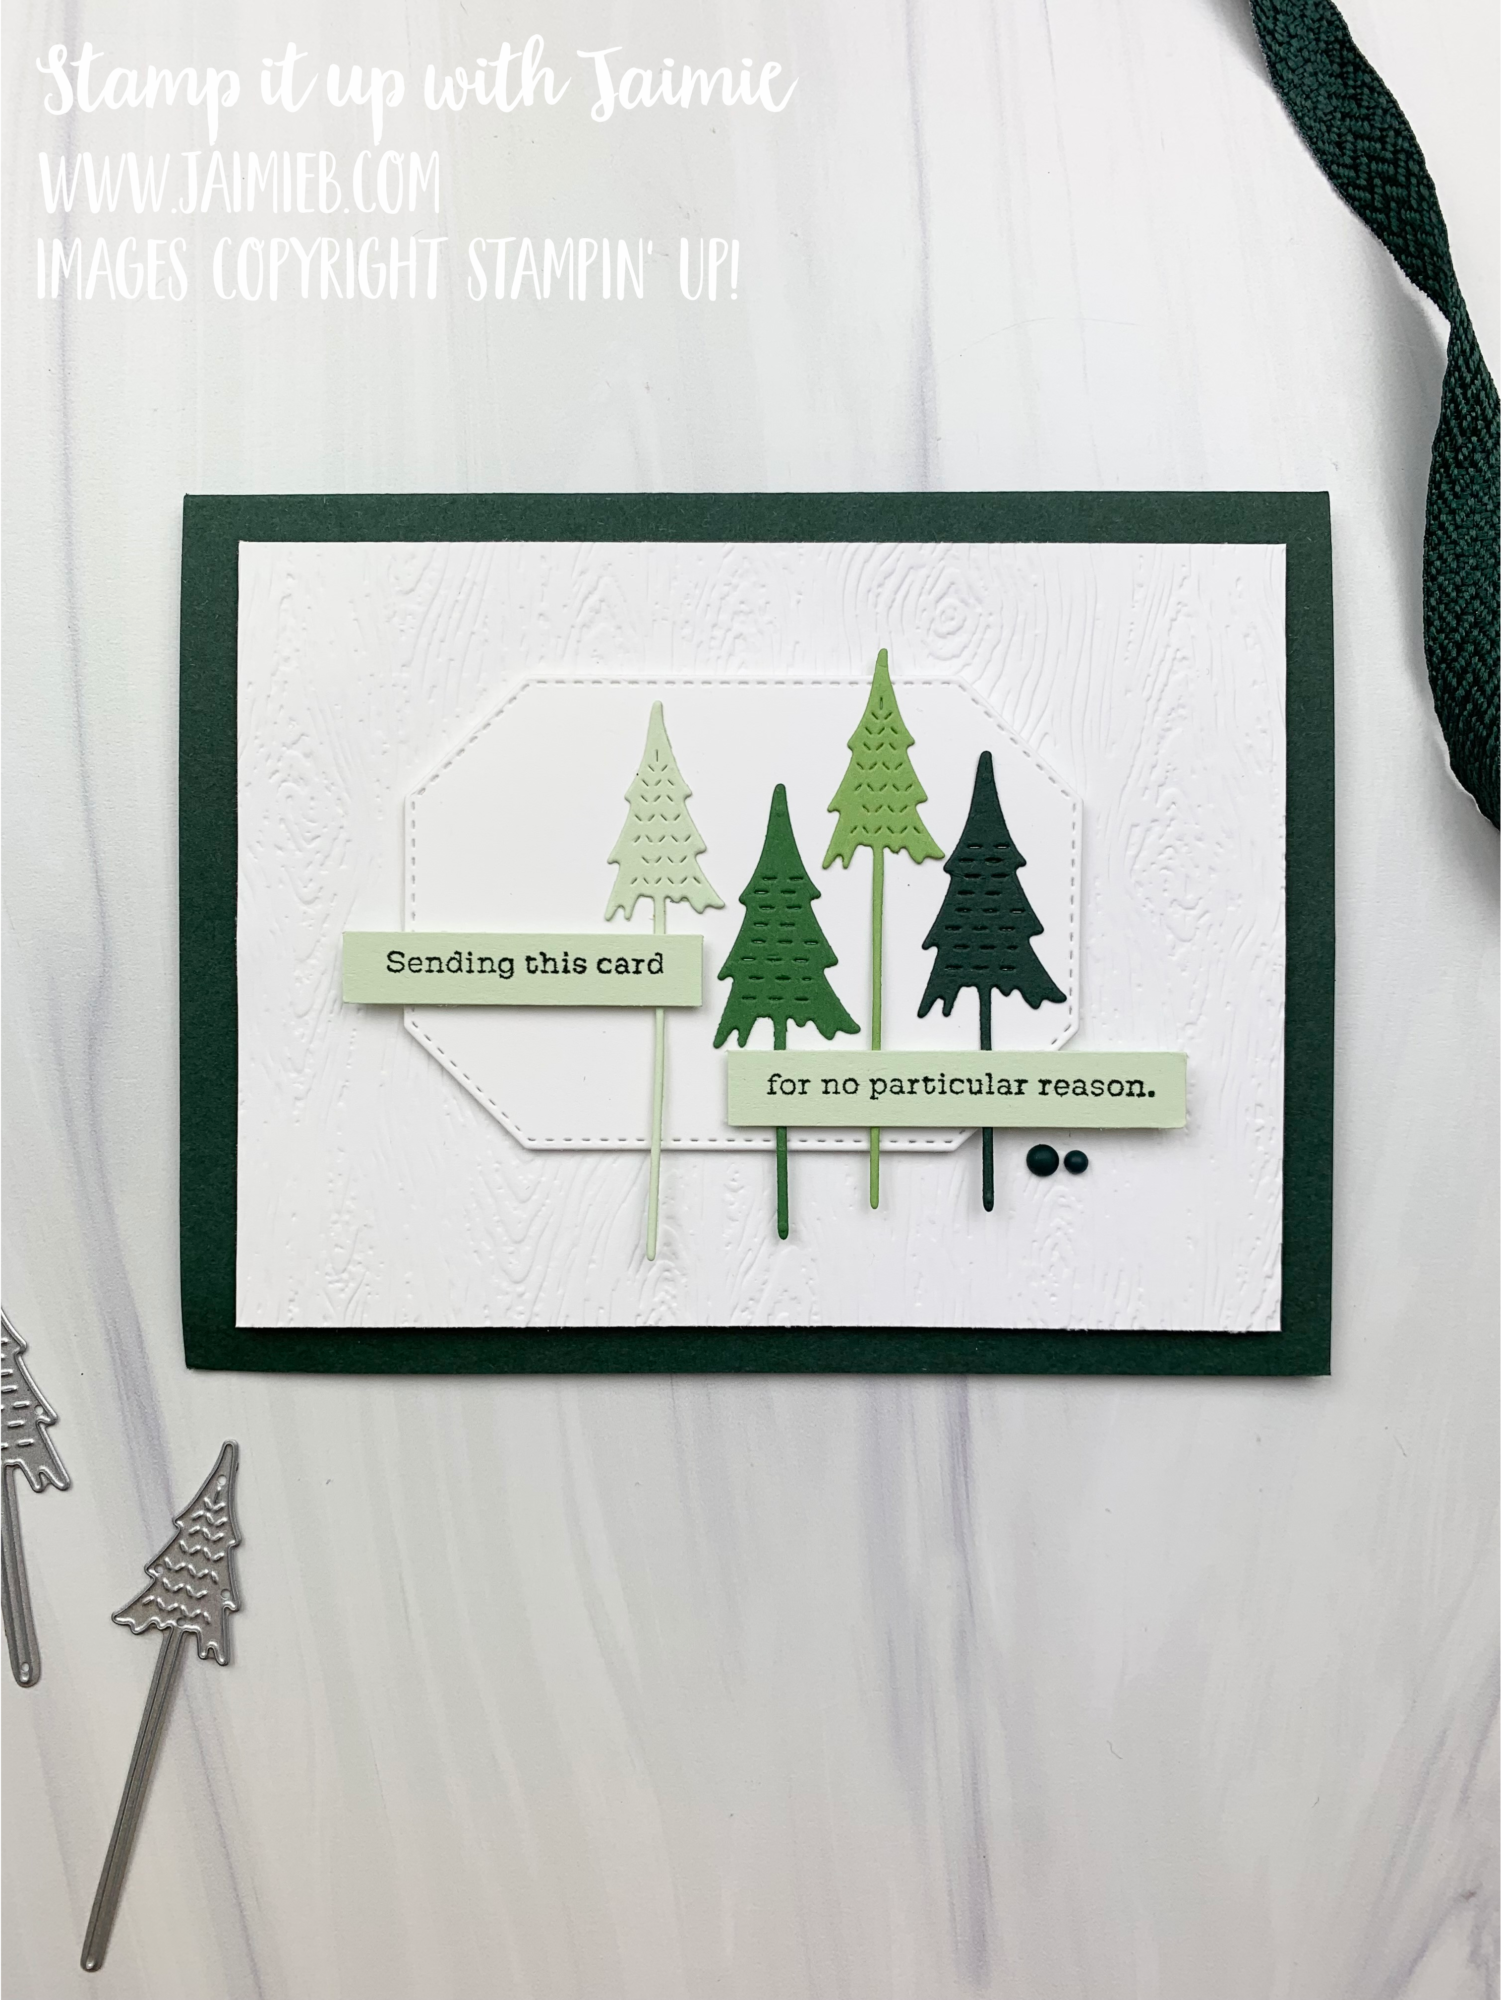 Stampin' Up! Whimsical Trees Card